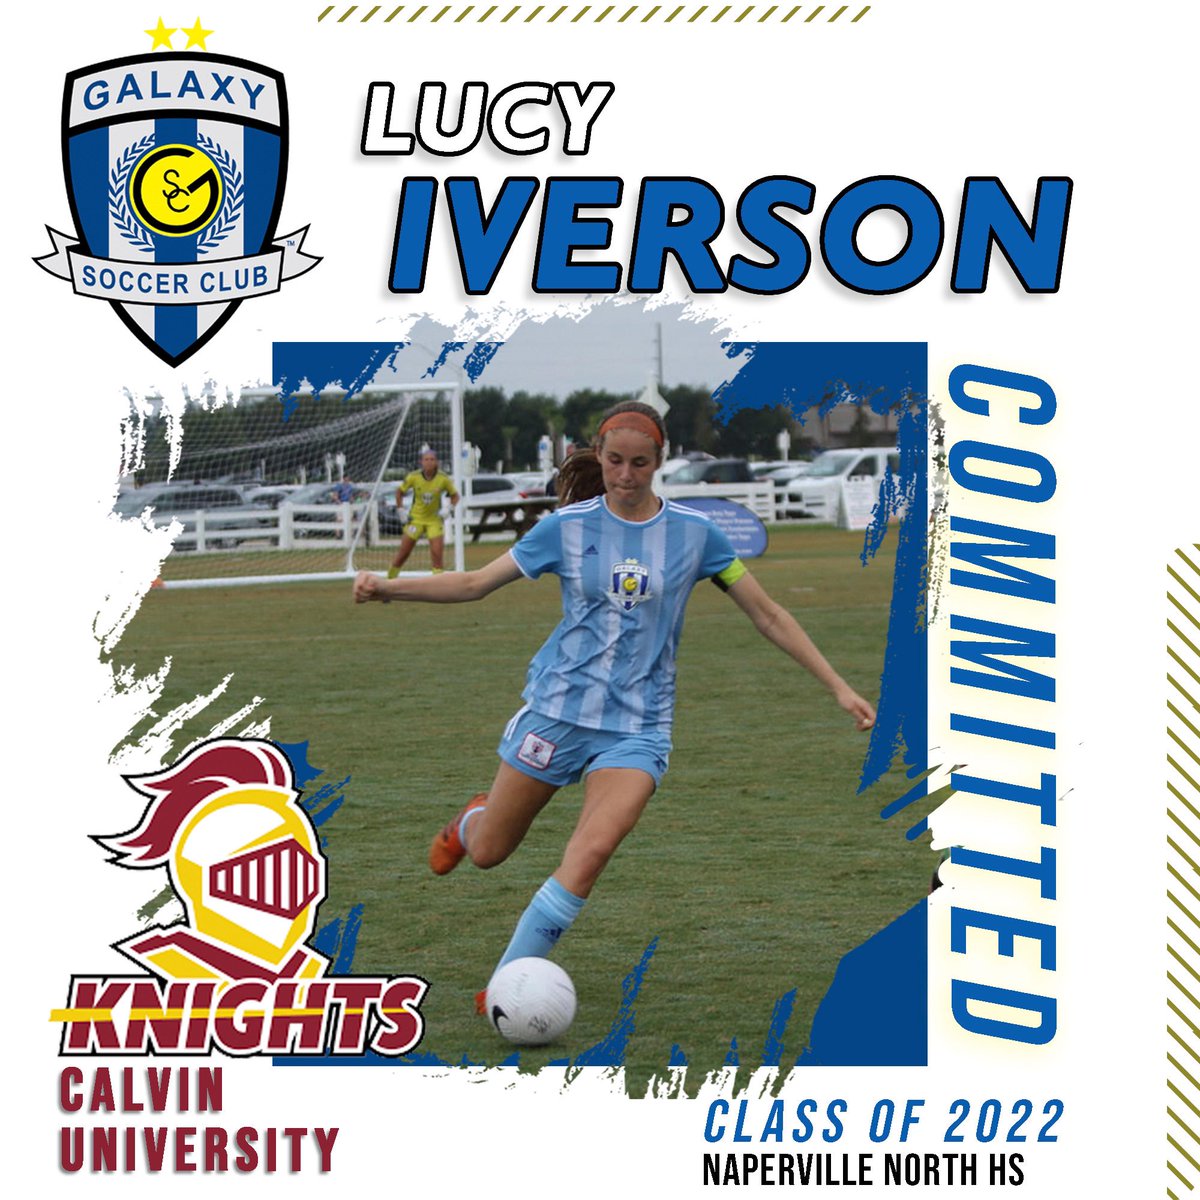 Congratulations to Lucy Iverson on her commitment to play NCAA DIII soccer at Calvin University who compete in the MIAA Conference. Galaxy looks forward to watching you continue your academic and soccer career at the next level❗️ #GalaxySC #nextlevel @calvinwsoccer @IversonLucy